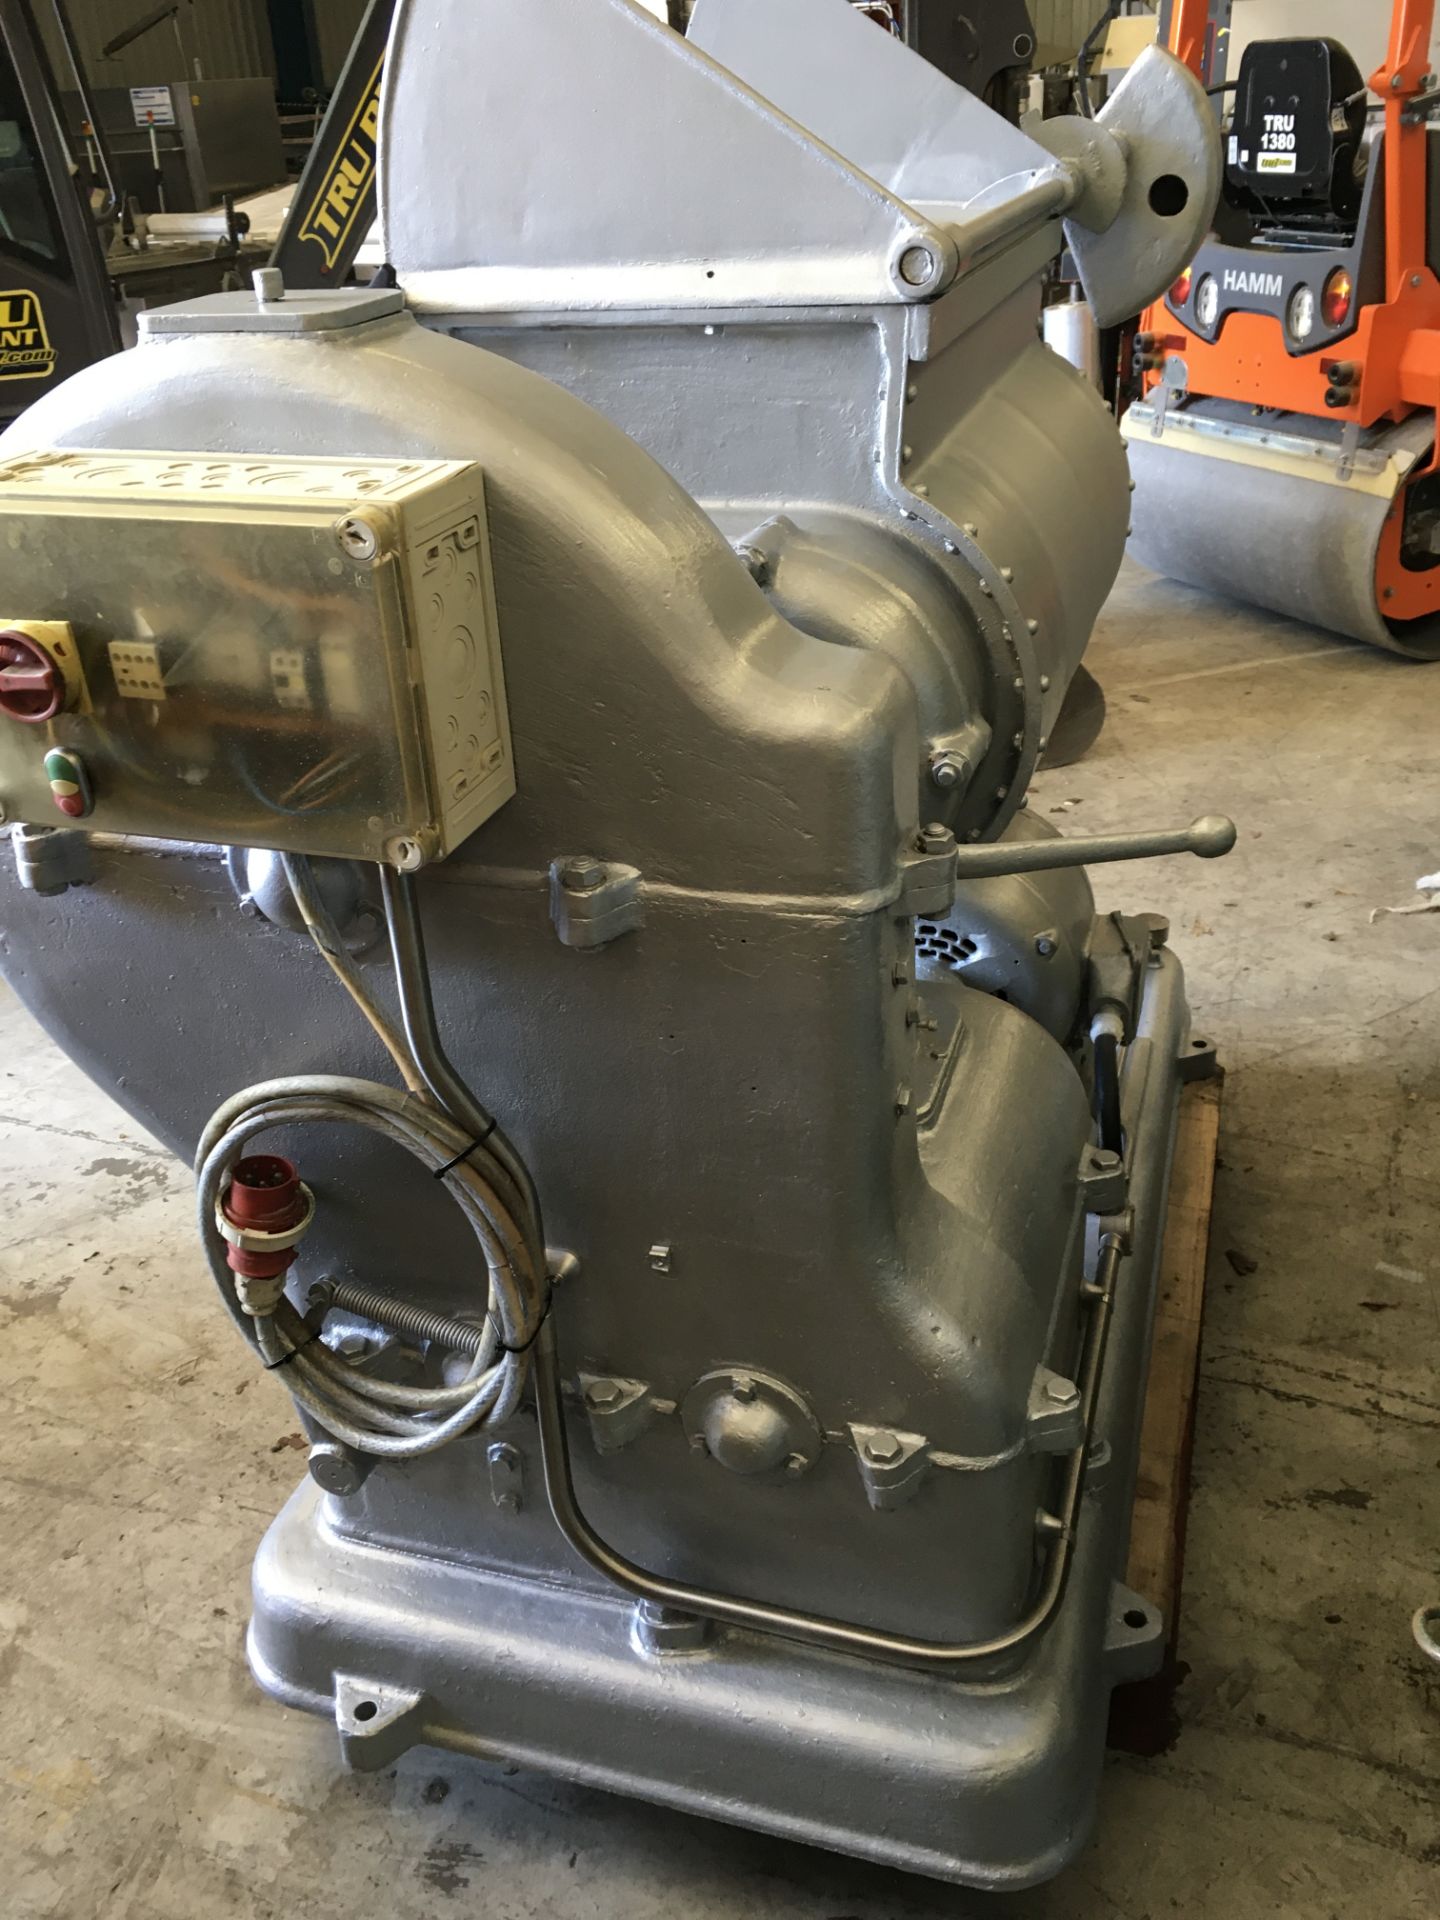 Morton Gridlap GL70 Mixer, approx. 1200mm x 1800mm x 1600mm high, £100 lift out charge - Image 2 of 4